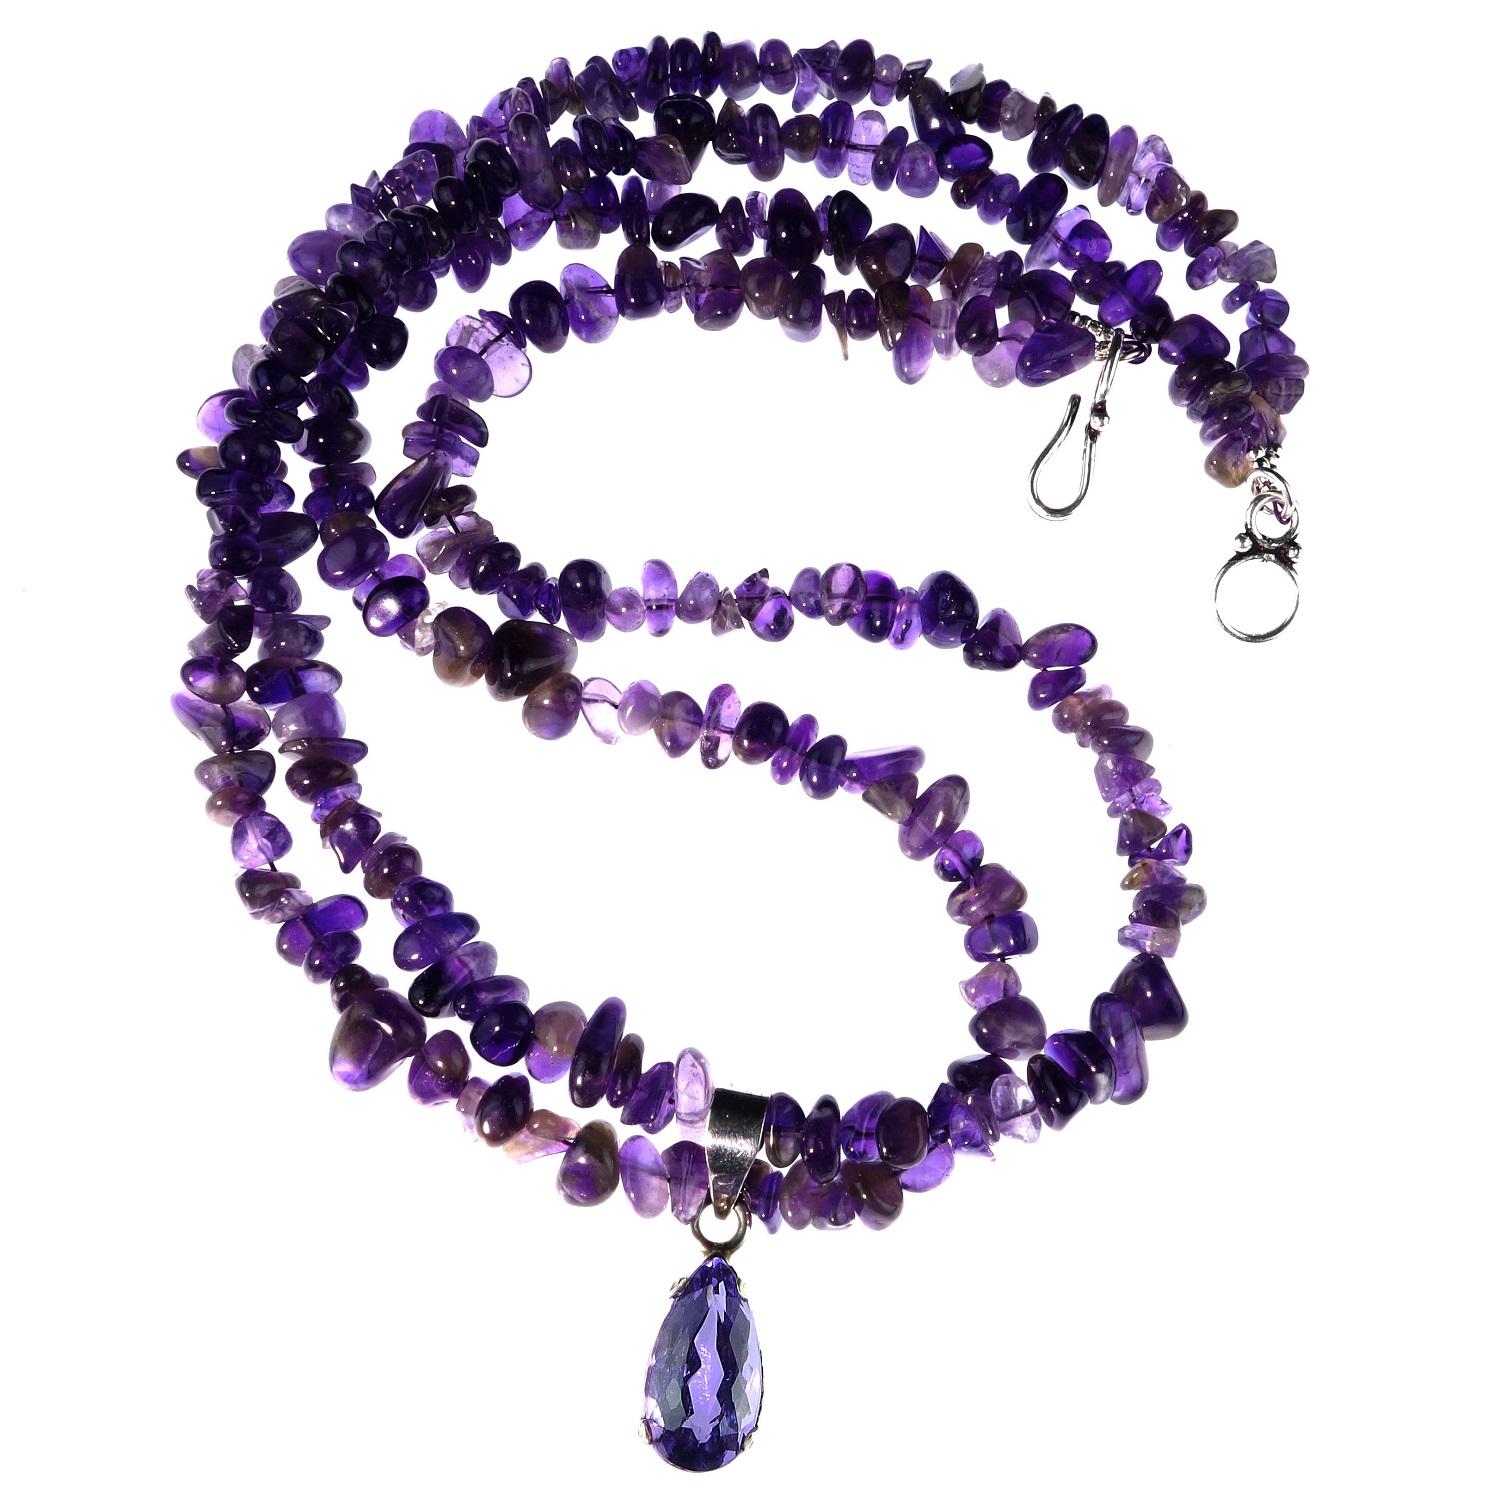 Double Strand Amethyst Necklace with Amethyst Pendant February Birthstone